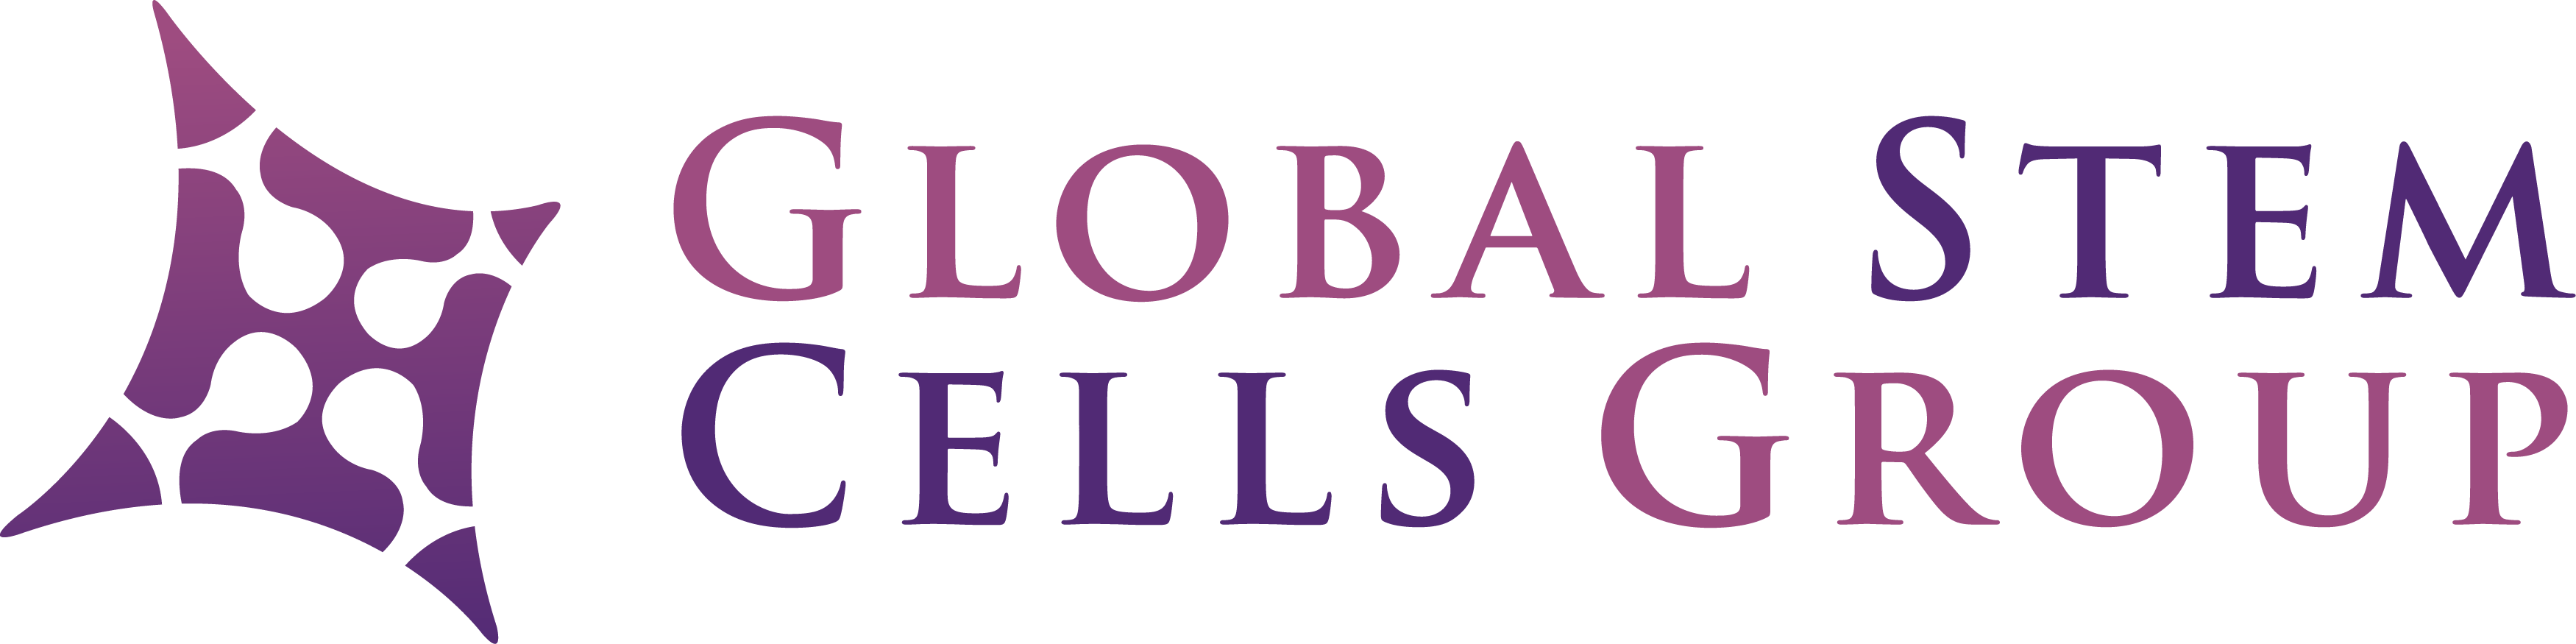 Global Stem Cells Group Announces the Opening of a Multi-Specialty Regenerative Medicine Center in Cancun